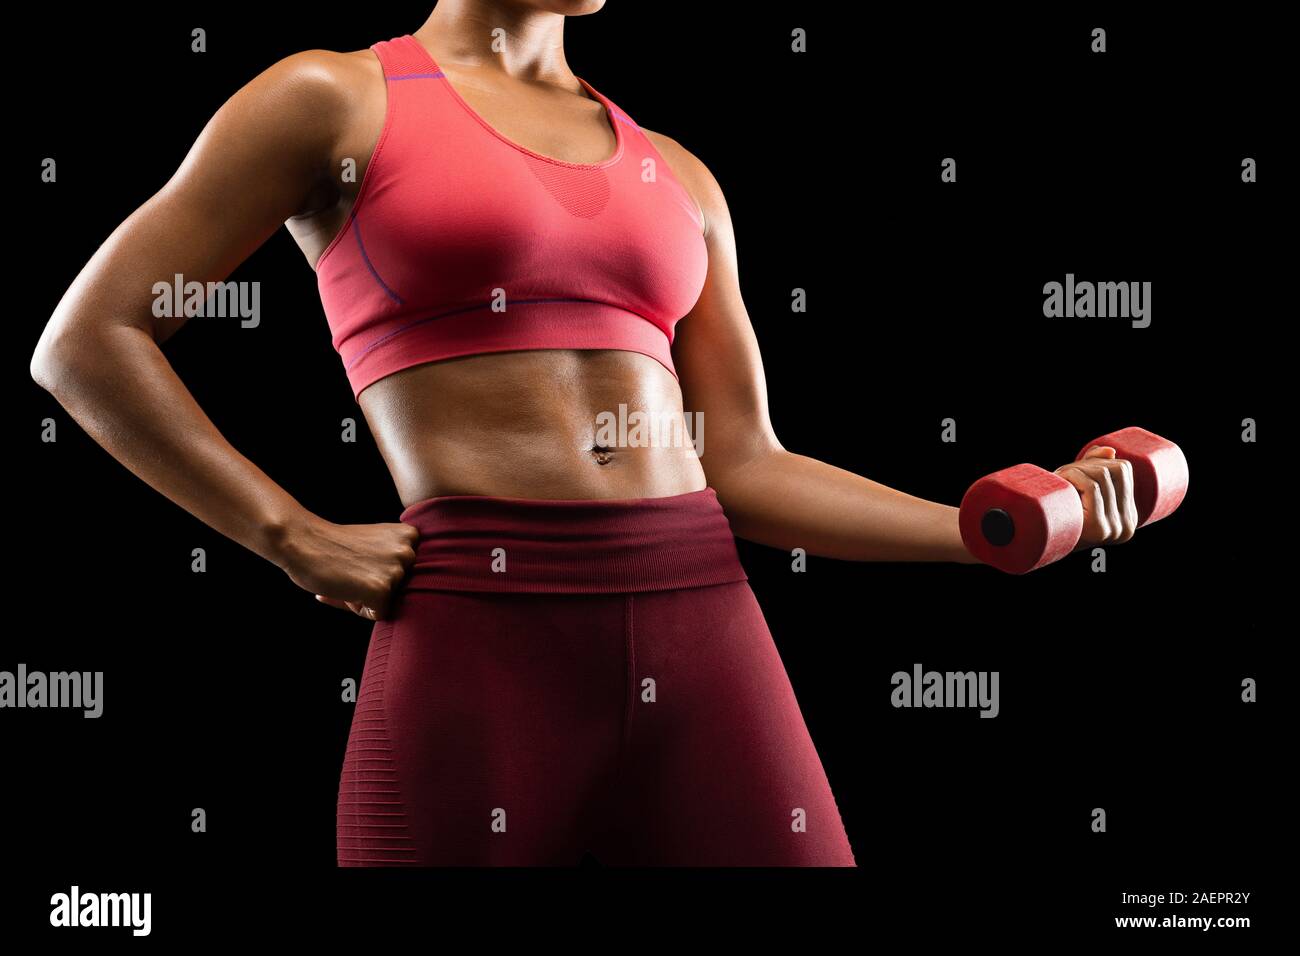 Strong black woman pumping iron over black background Stock Photo